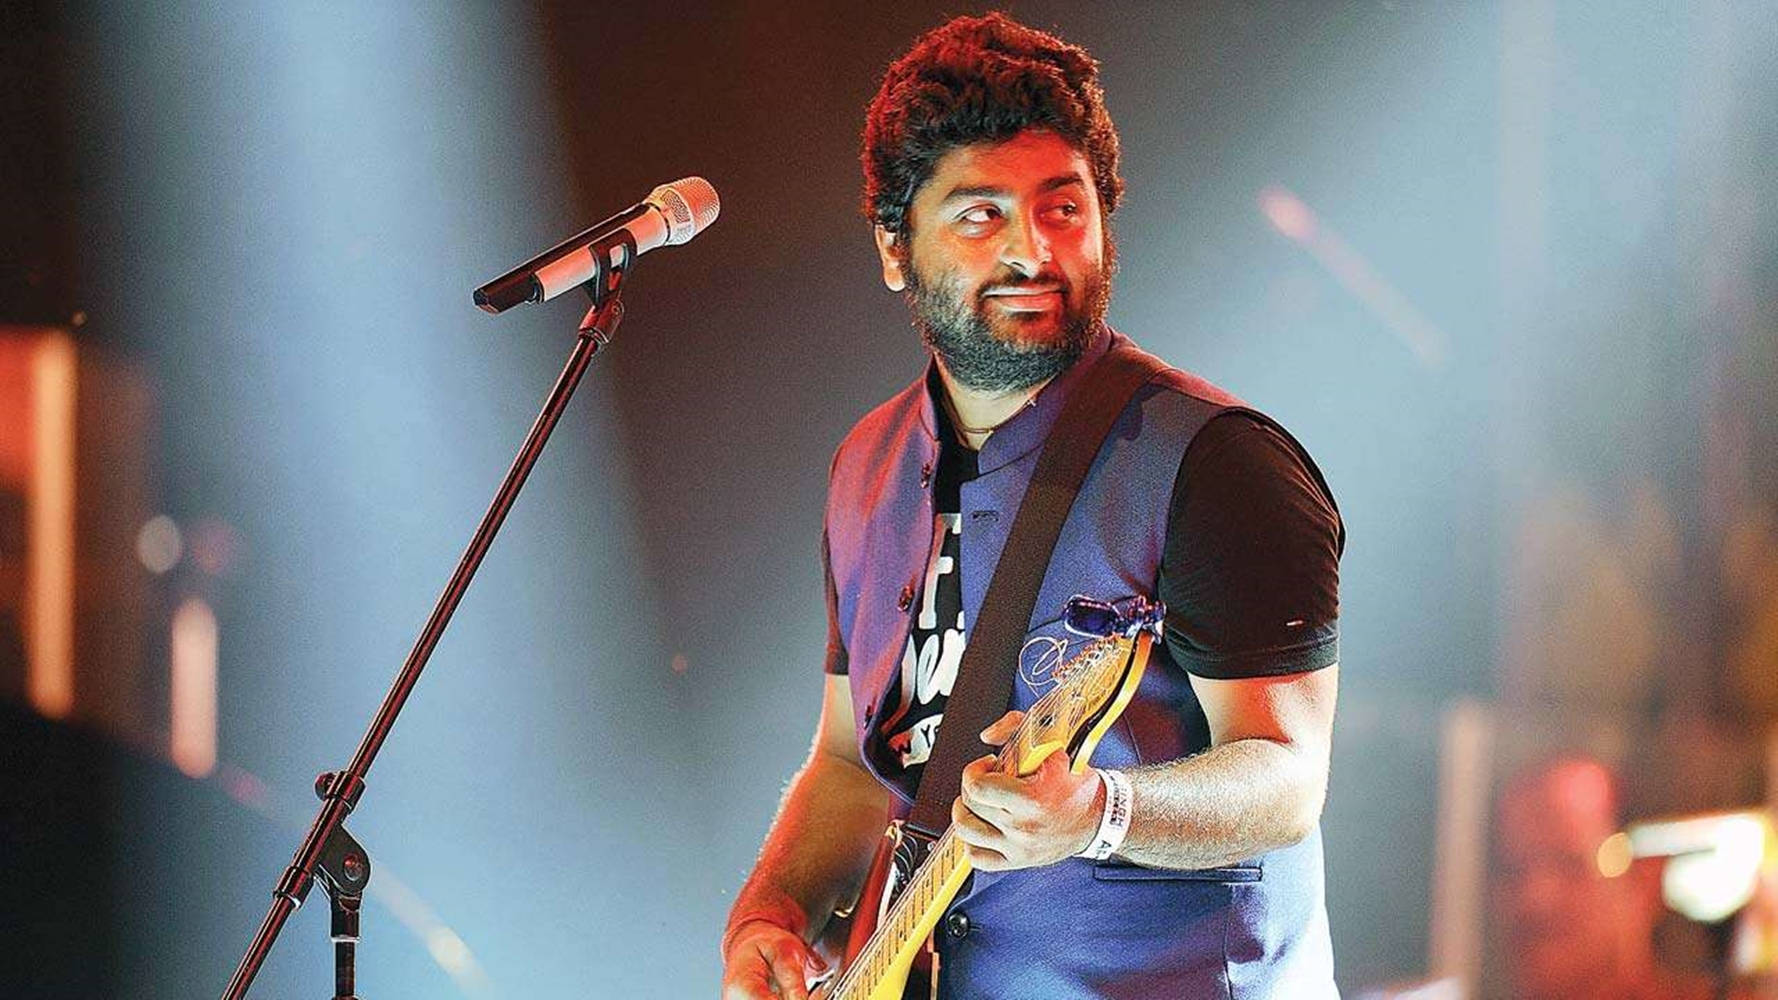 Arijit Singh Candid While Playing Guitar Background